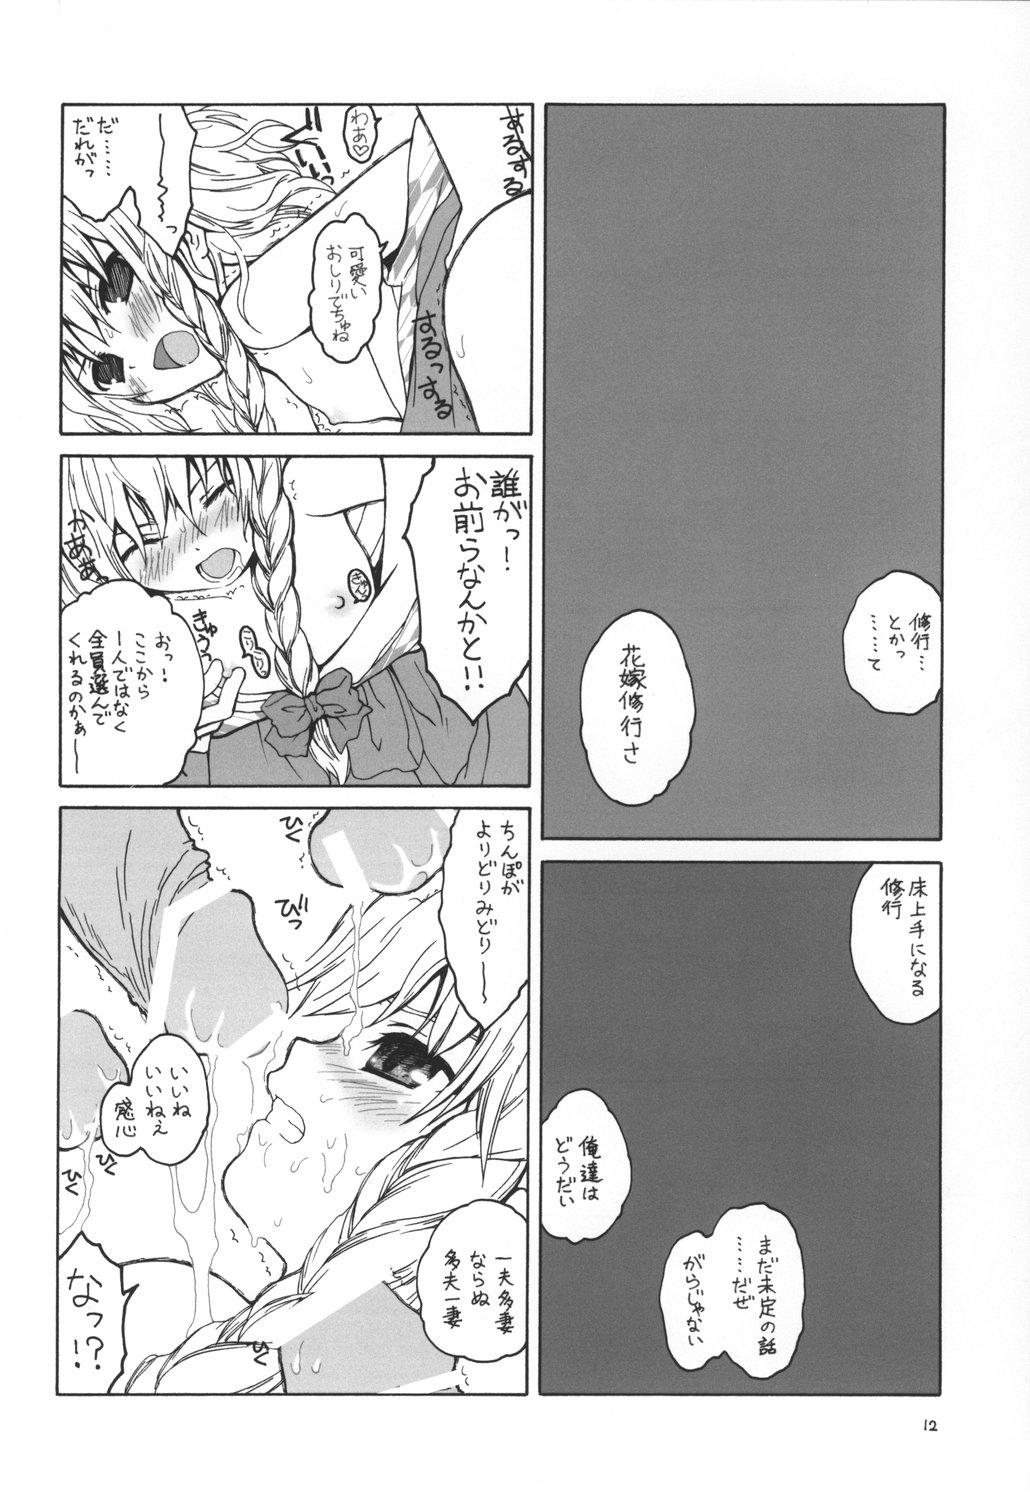 Cuckold - Aru omise no ichinichi Sono 2 - Touhou project Monster - Page 11